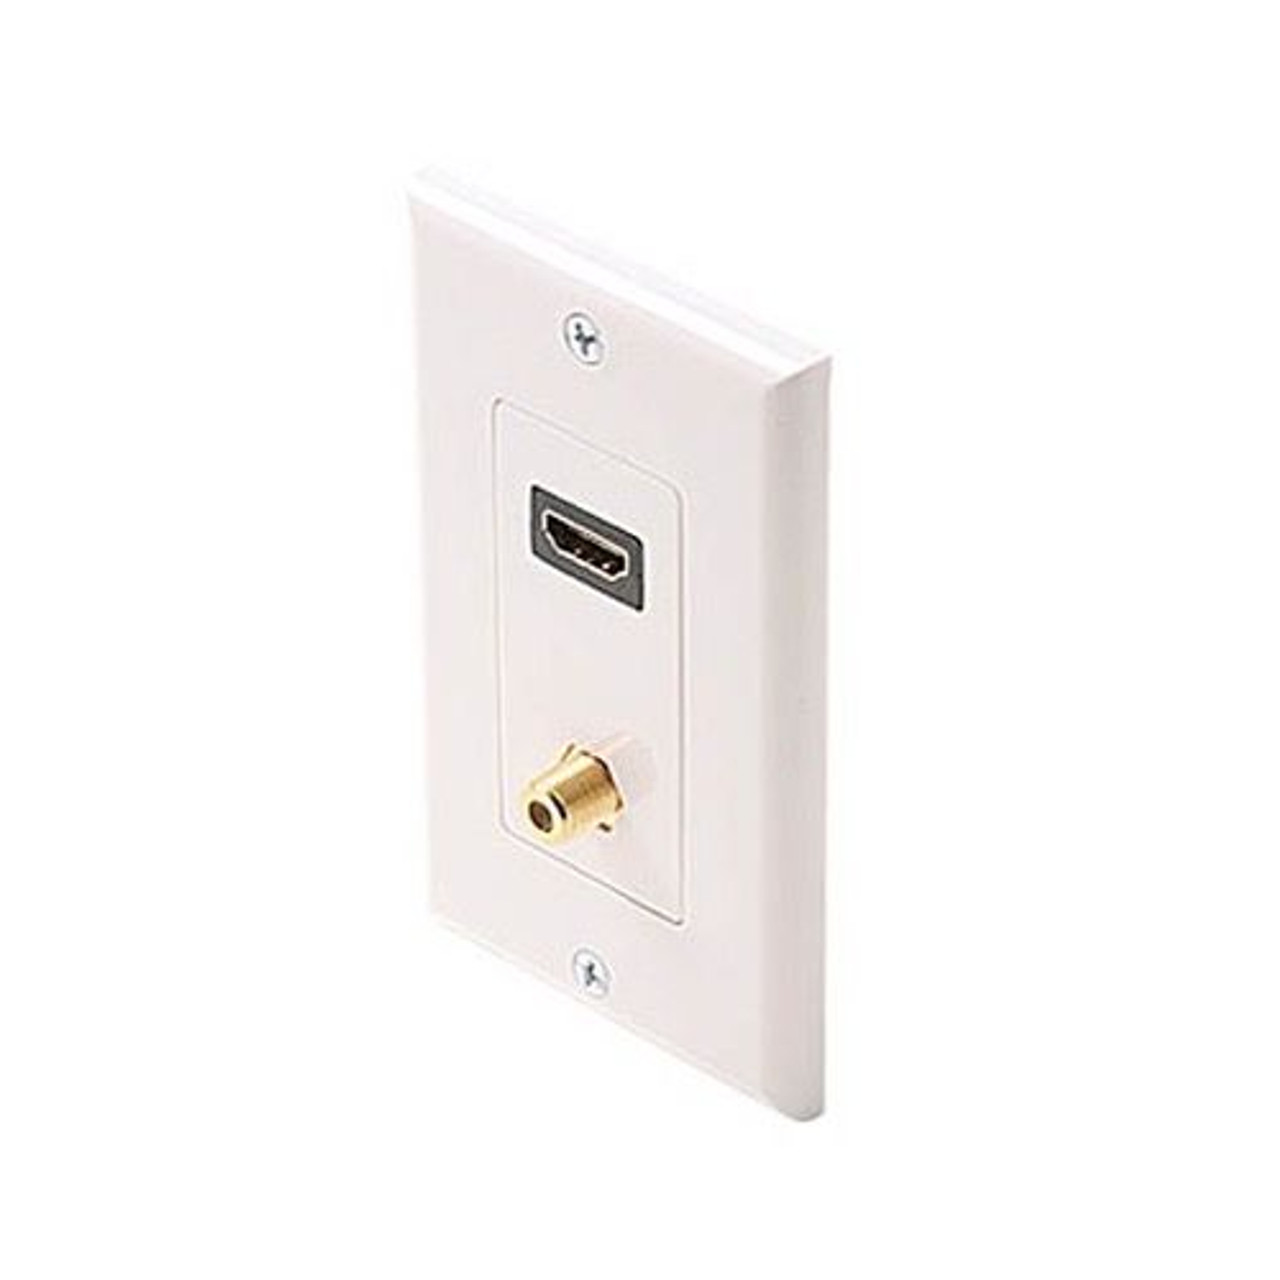 Eagle HDMI Wall Plate F Jack White Feed Thru Connector Gold Plate Decorator Style HDMI Coaxial White Plate HDMI Female to HDMI Female, High Definition Multi-Media Interface